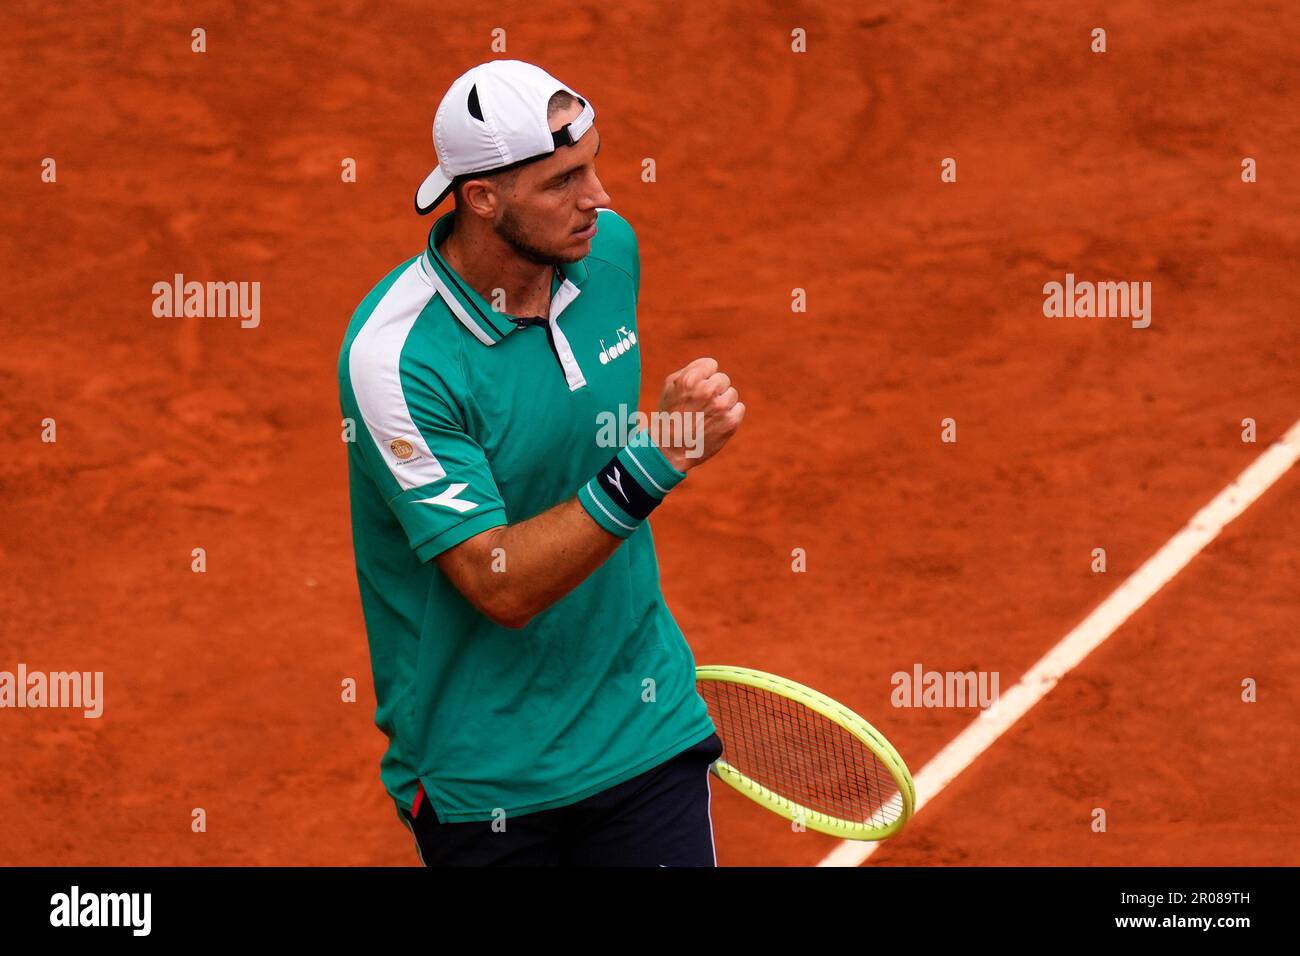 Jan-Lennard Struff, of Germany, celebrates a point during his match against Carlos Alcaraz, of Spain, during their mens singles final match at the Madrid Open tennis tournament in Madrid, Spain, Sunday, May